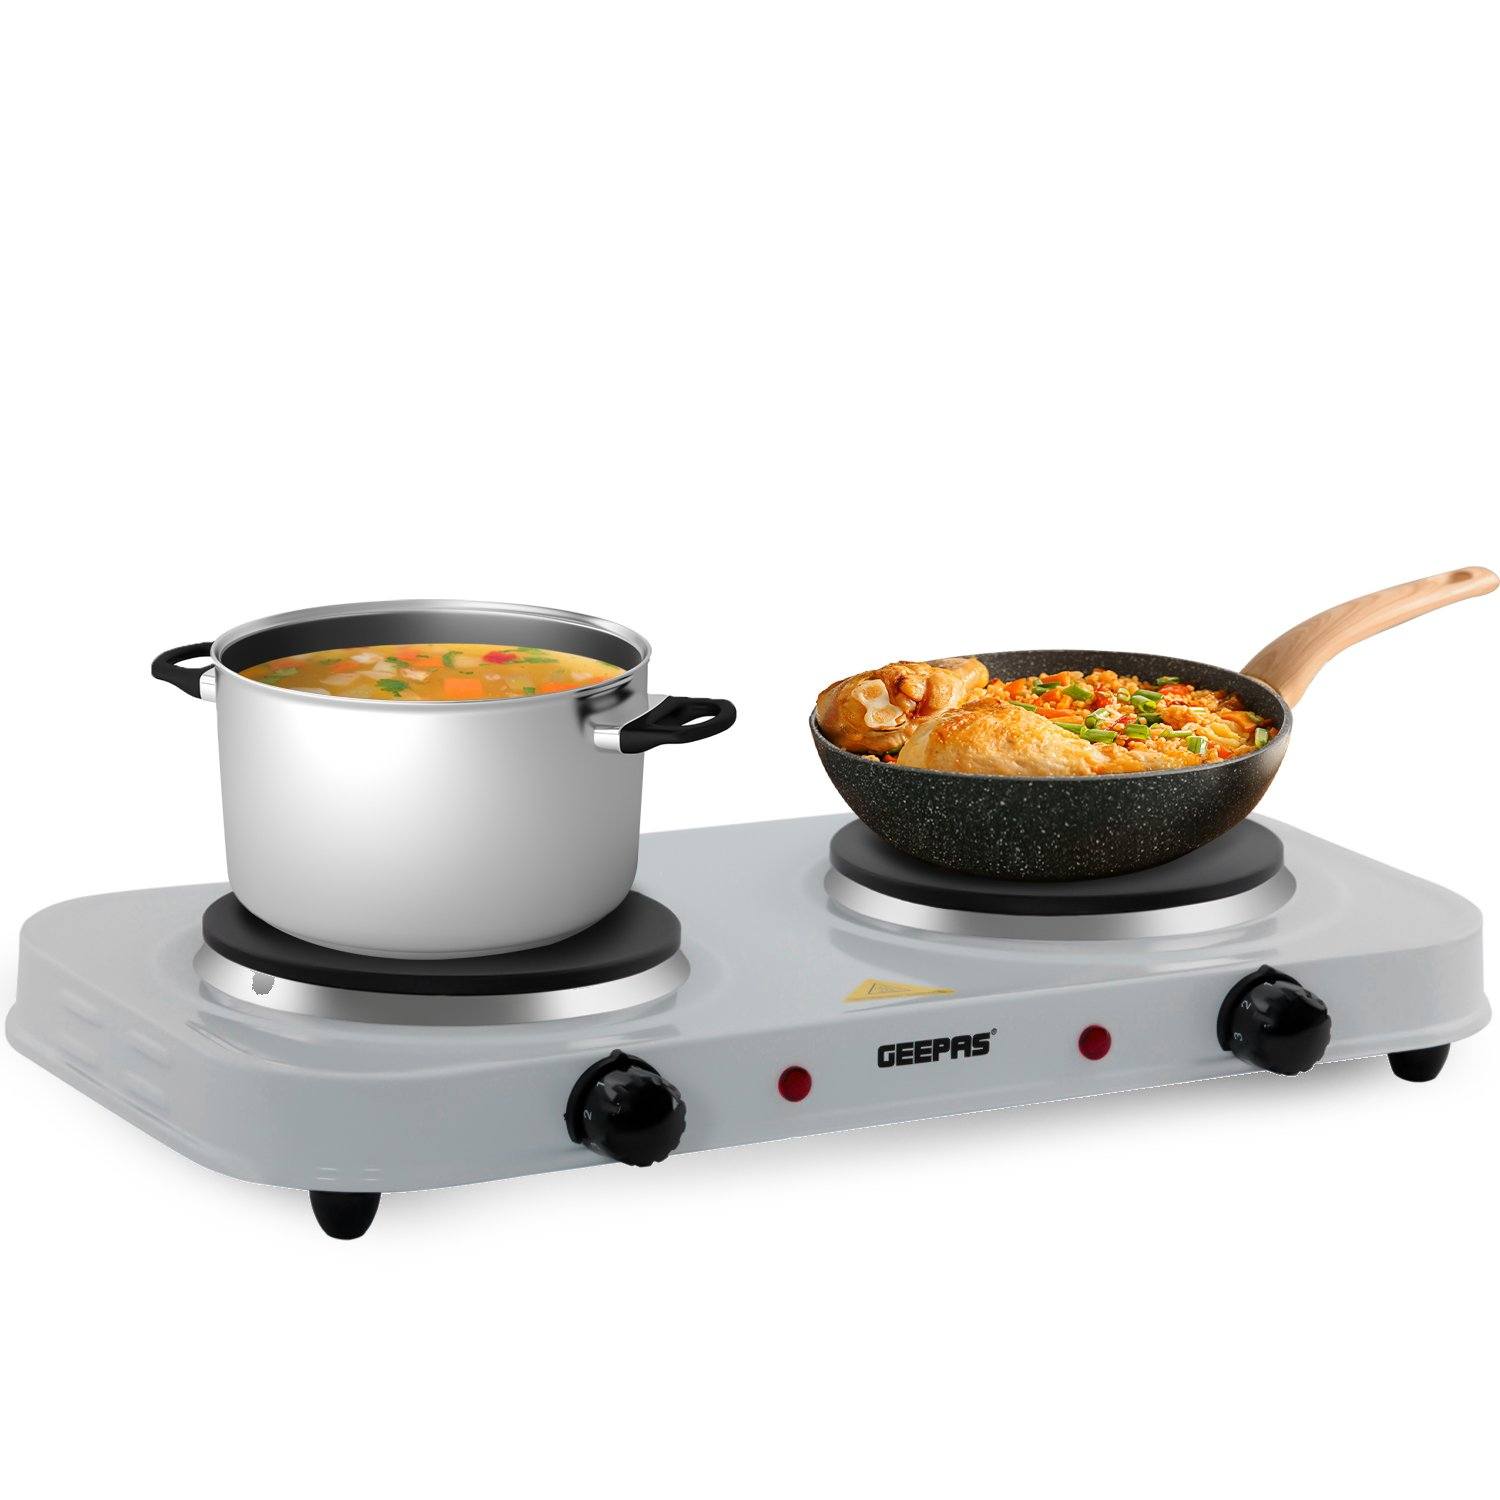 2000W Double Hot Plate Cooker Geepas | For you. For life. 